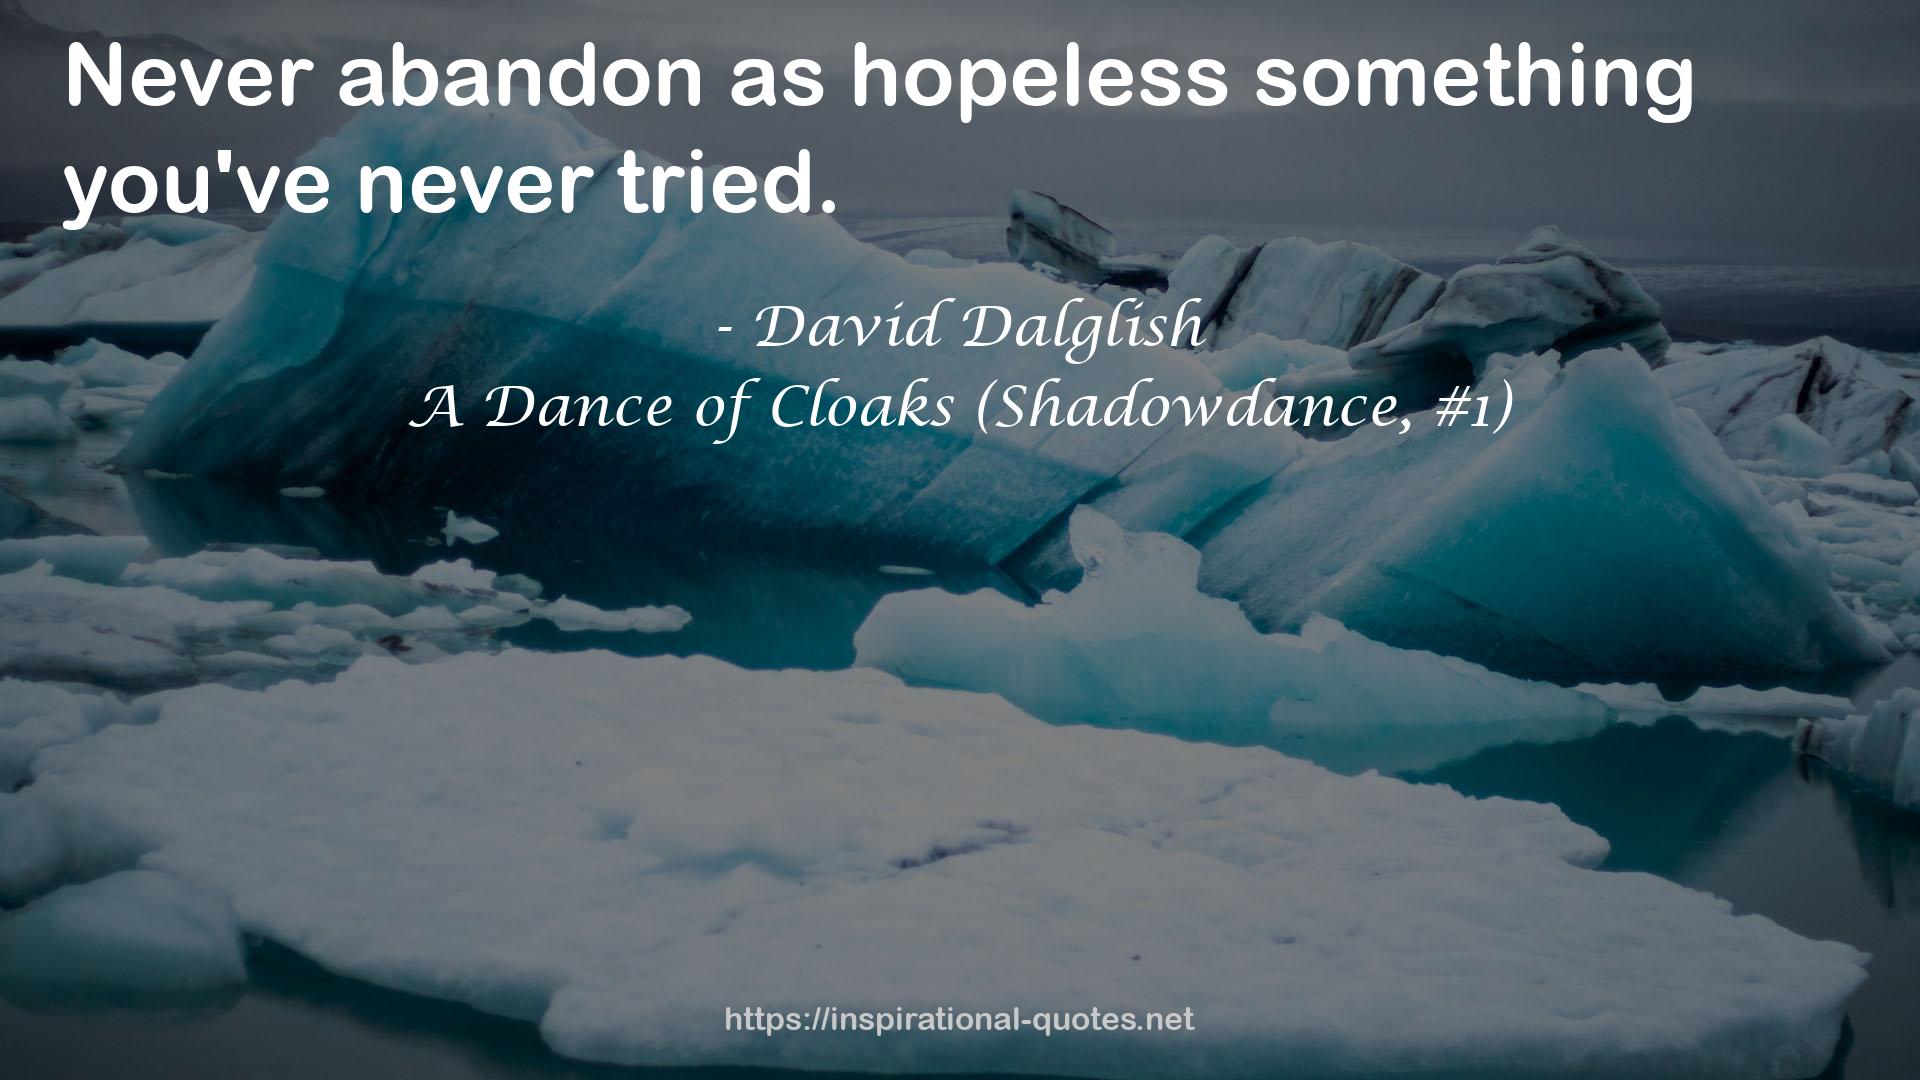 A Dance of Cloaks (Shadowdance, #1) QUOTES